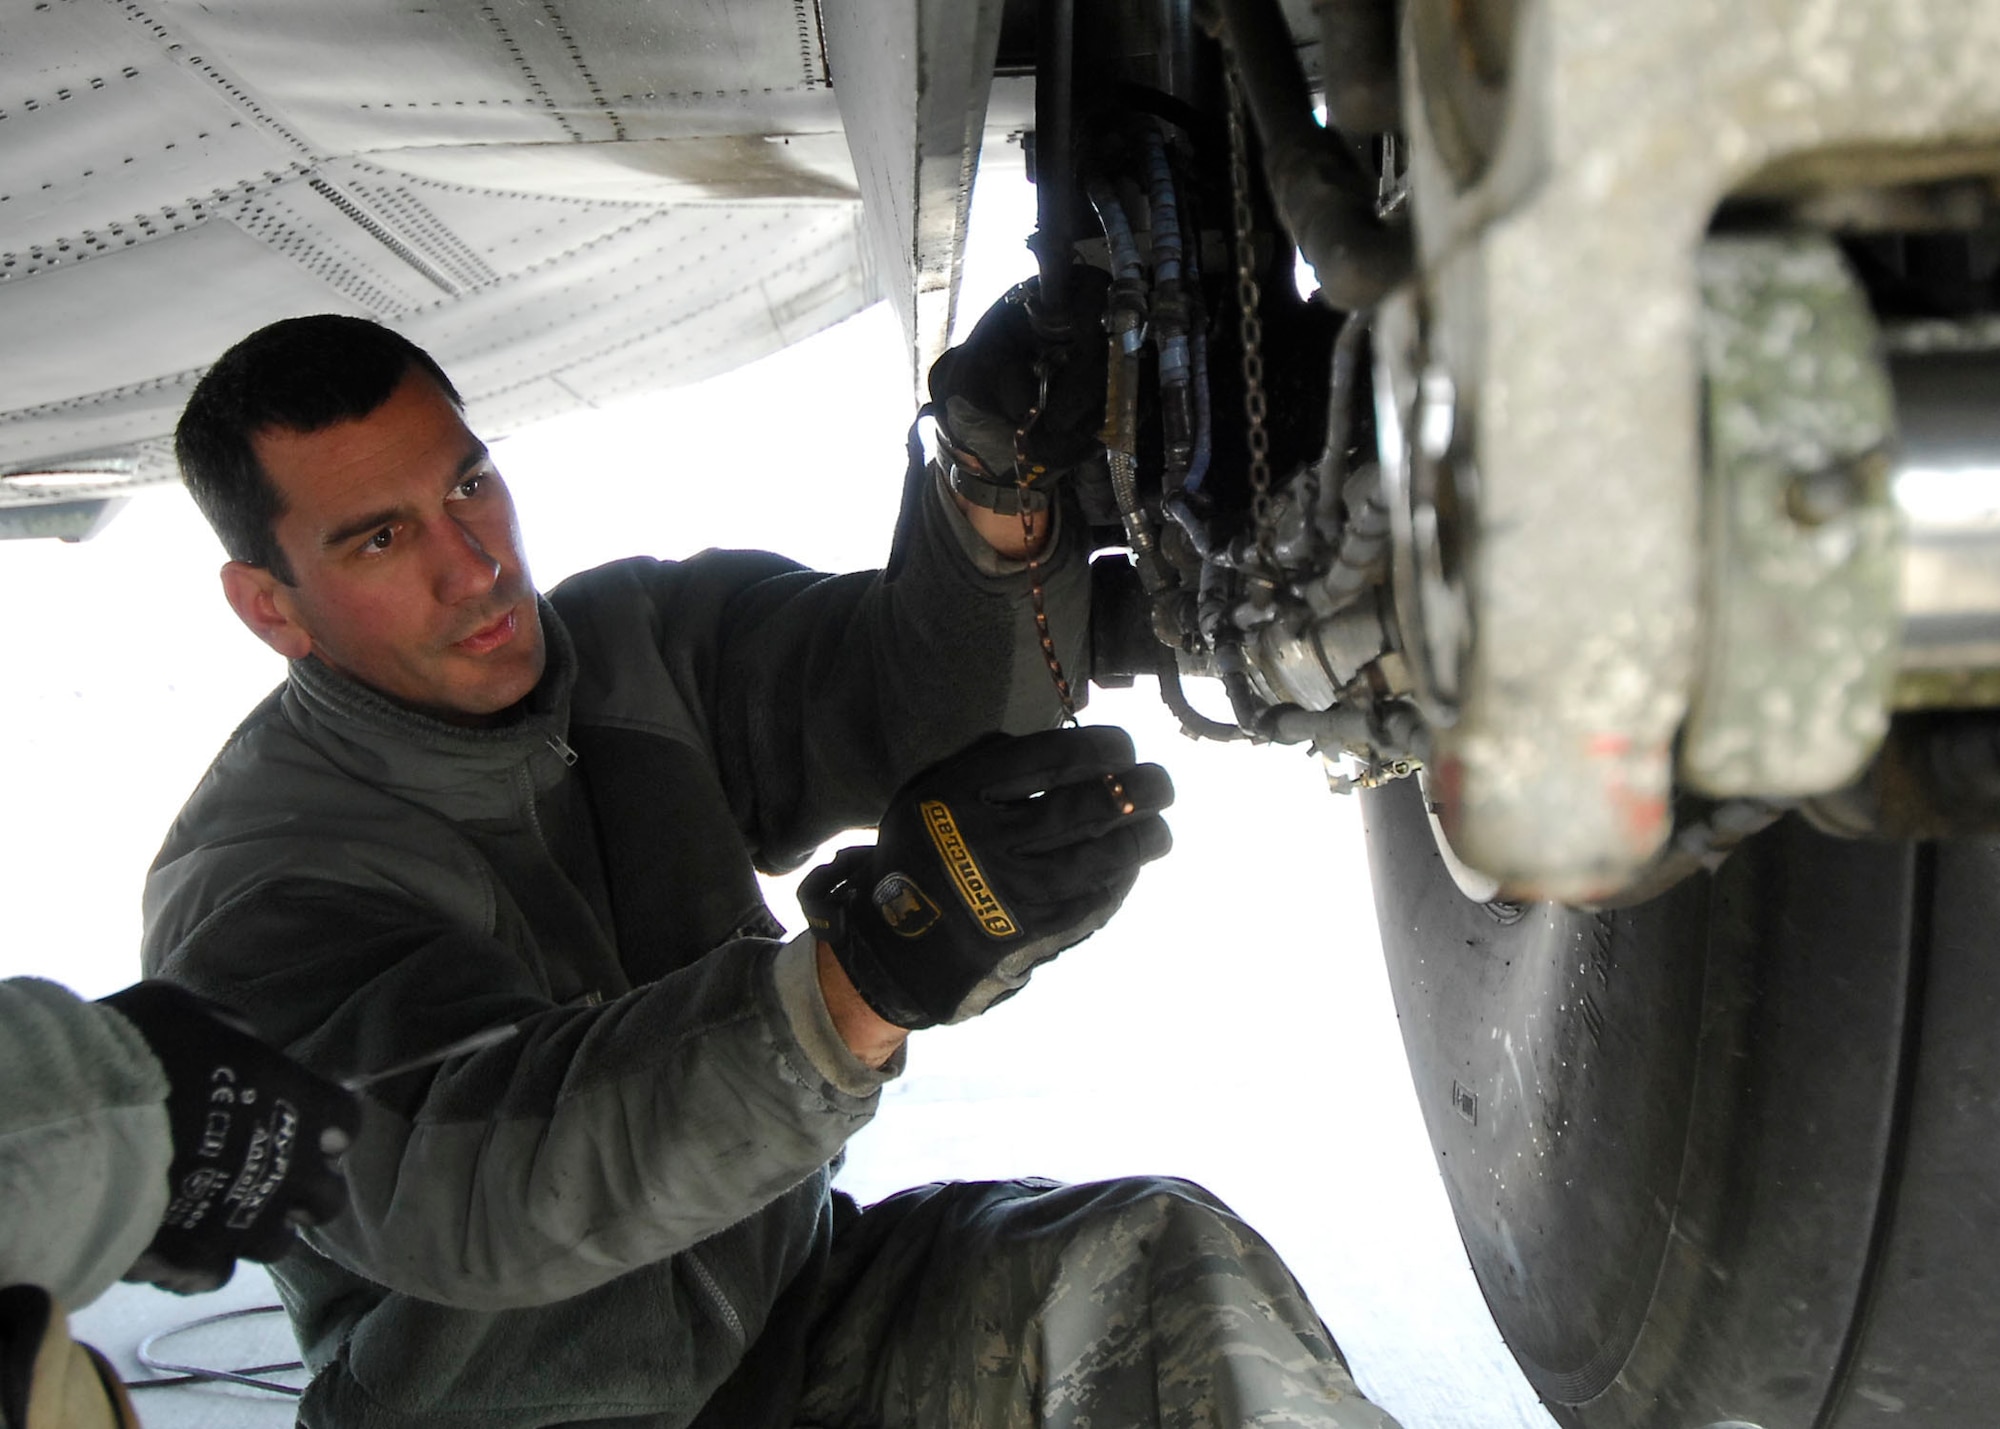 BAGRAM AIRFIELD, Afghanistan -- Tech. Sgt. Mike Smith performs landing gear maintenance on a C-130 Hercules, Dec. 7, 2009.  During an inspection on the aircraft the Airmen found a problem with the landing gear which they immediately fixed to keep the aircraft on time for future missions.  Sergeant Smith, a crew chief from the 455th Expeditionary Aircraft Maintenance Squadron, is deployed from the Nevada Air National Guard's 152nd Airlift Wing and hails from Reno, Nev.  (U.S. Air Force photo/Senior Airman Felicia Juenke)